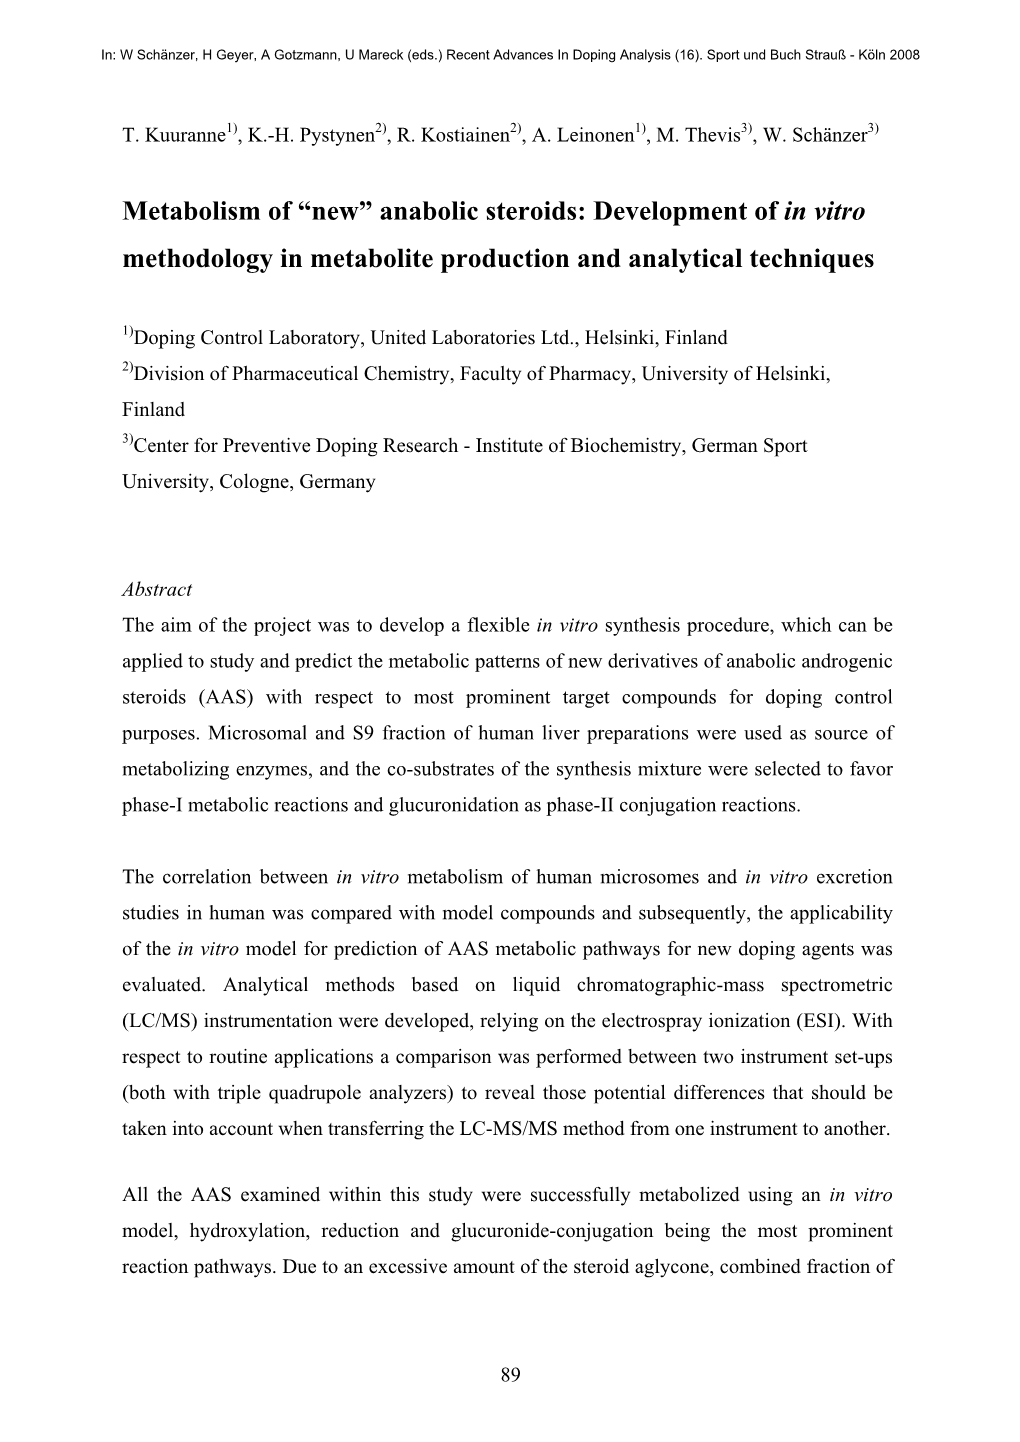 Metabolism of “New” Anabolic Steroids: Development of in Vitro Methodology in Metabolite Production and Analytical Techniques